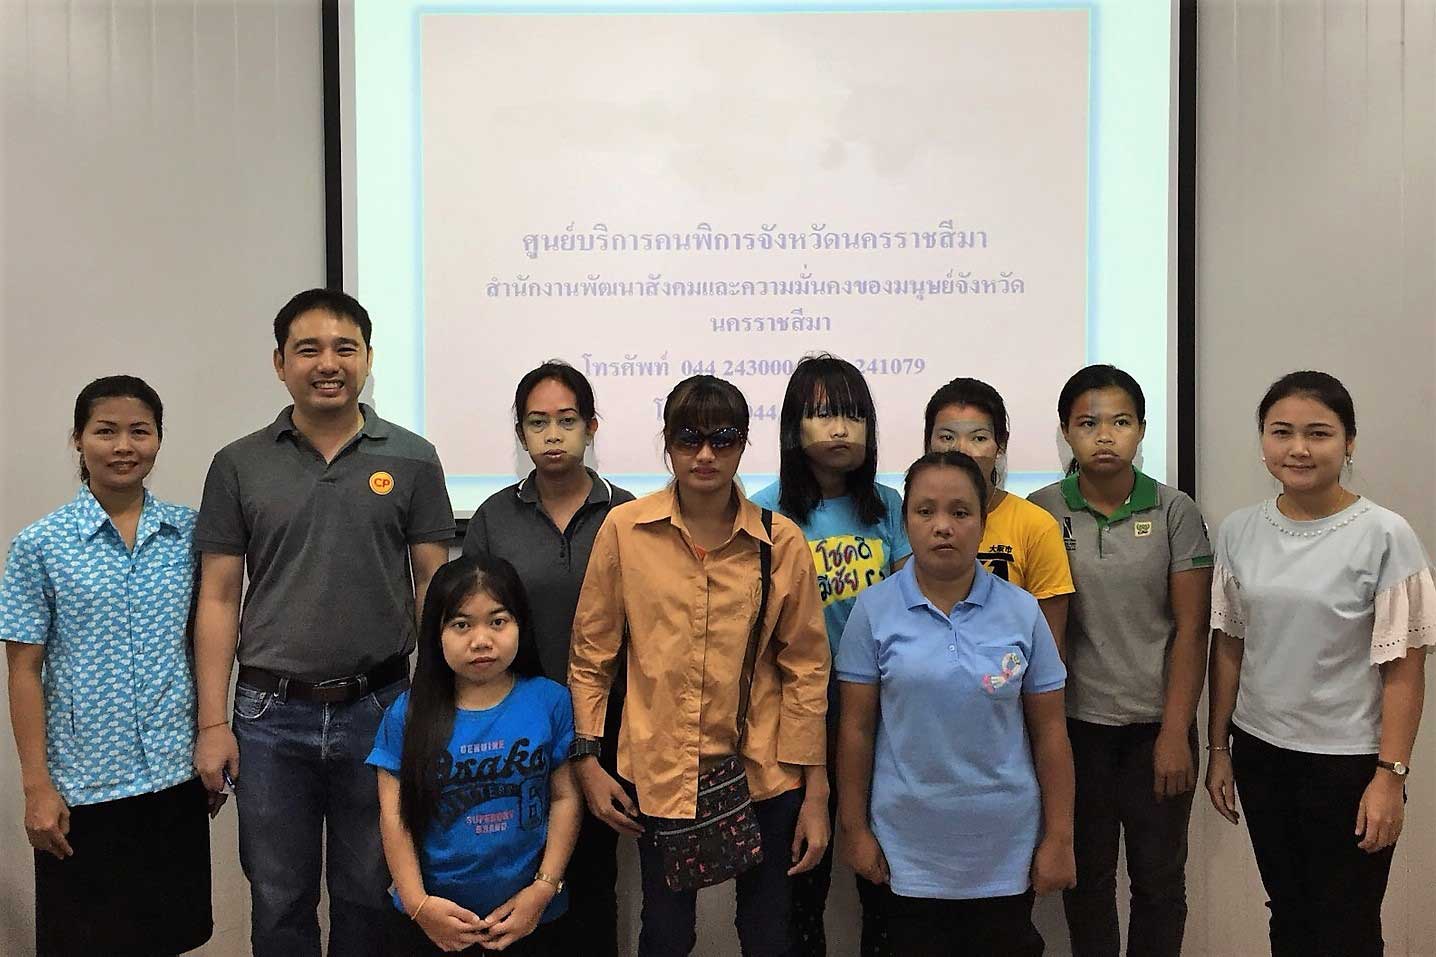 Disability Service Center and CPF host a training program to improve disabled employees’ wellbeing